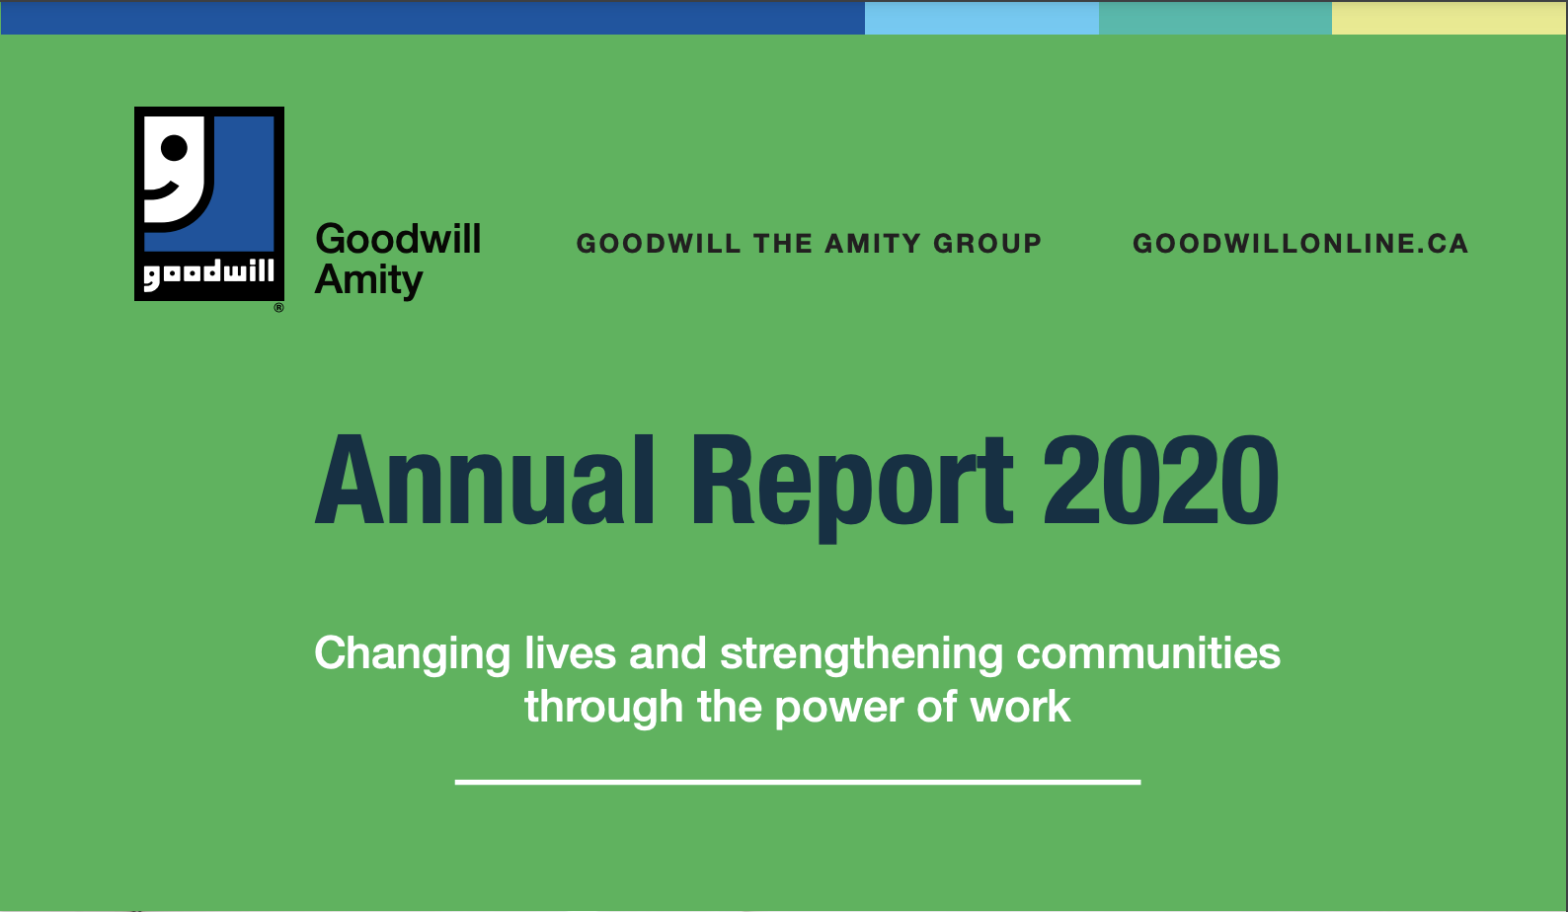 thumbnail screenshot of the Goodwill Amity Annual Report 2020